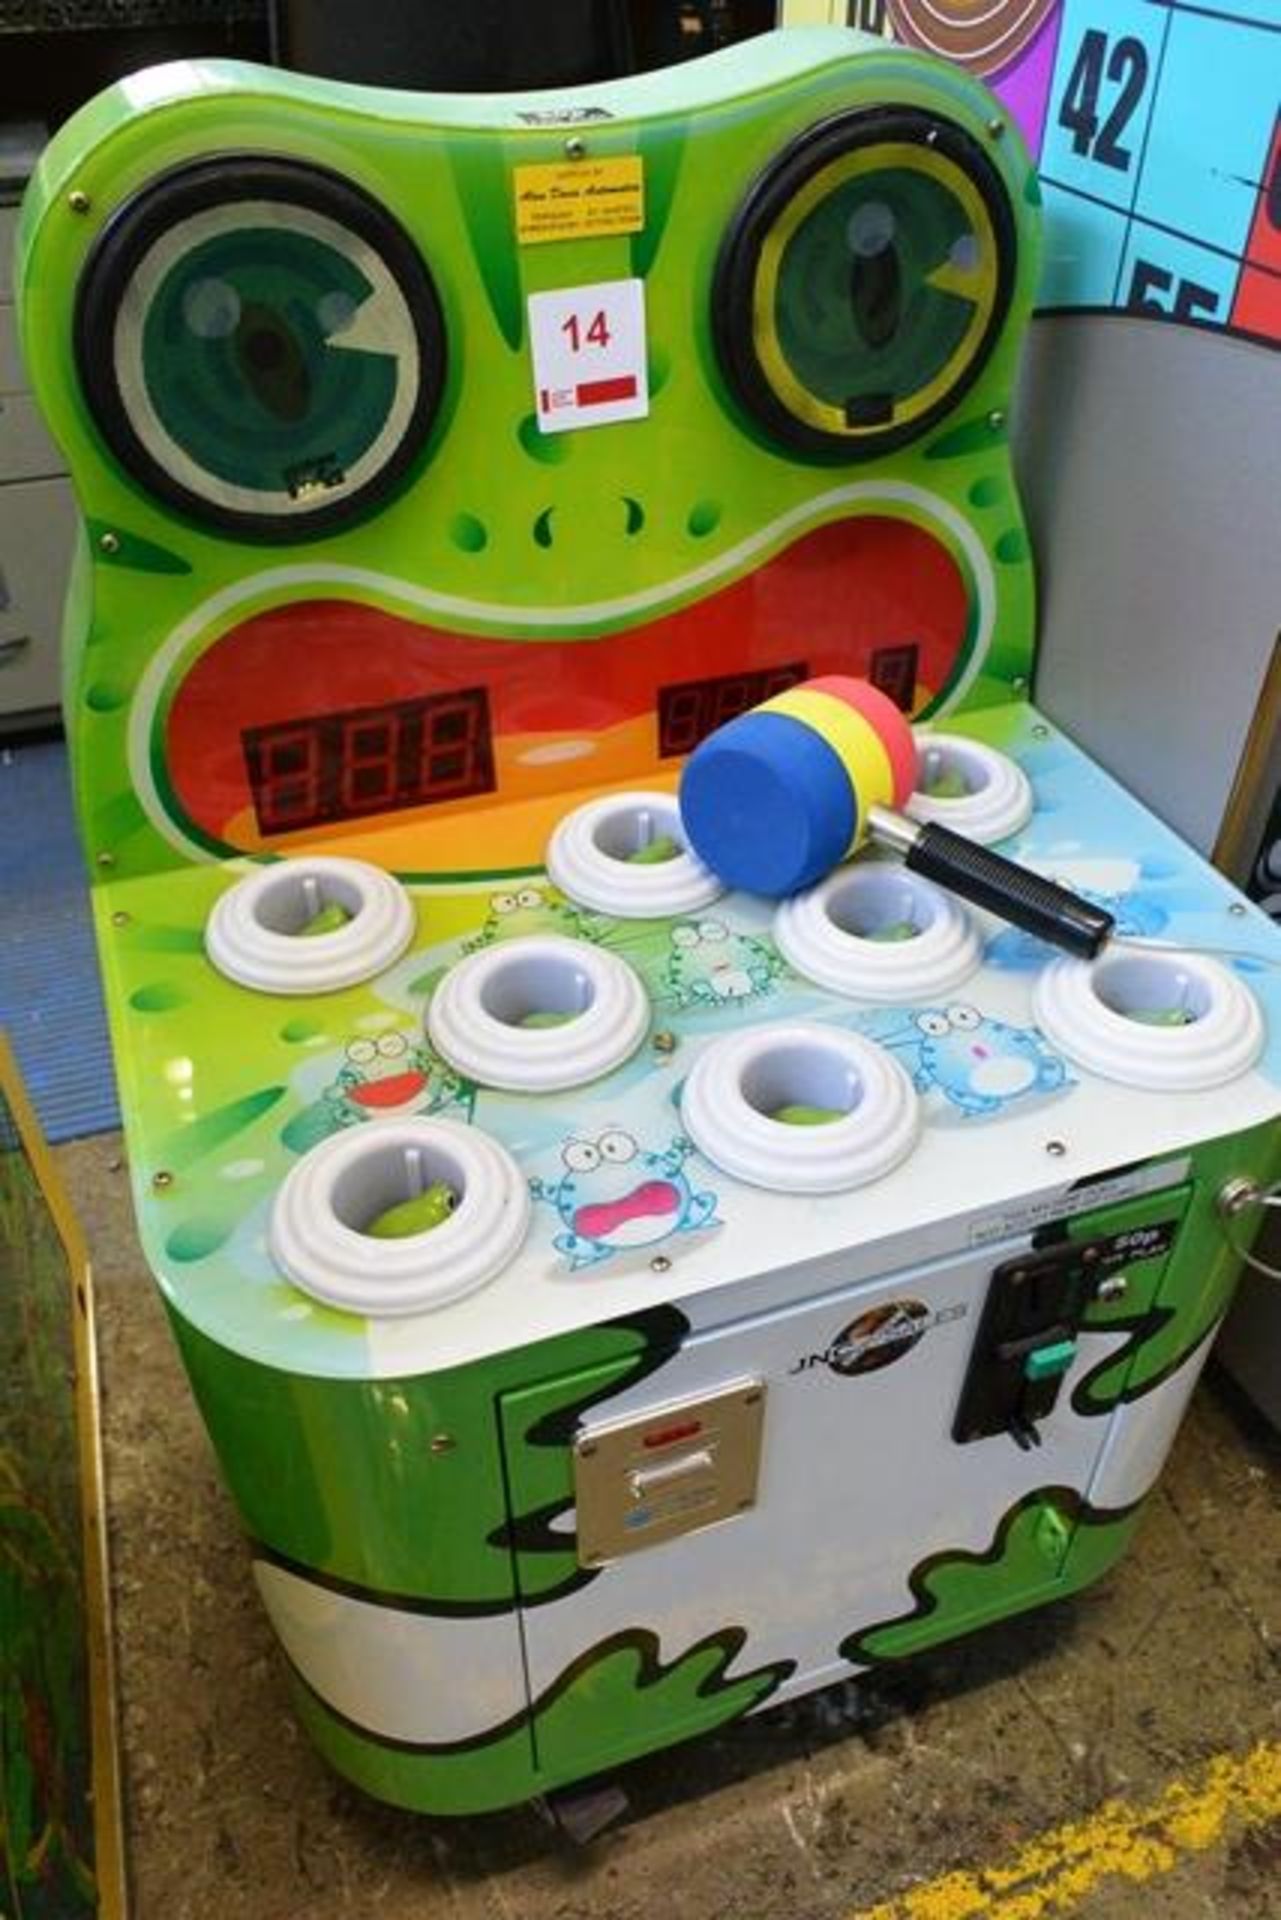 JNC Export Sales "Whack-a-Mole" style amusement game with digital score display and speakers, pay to